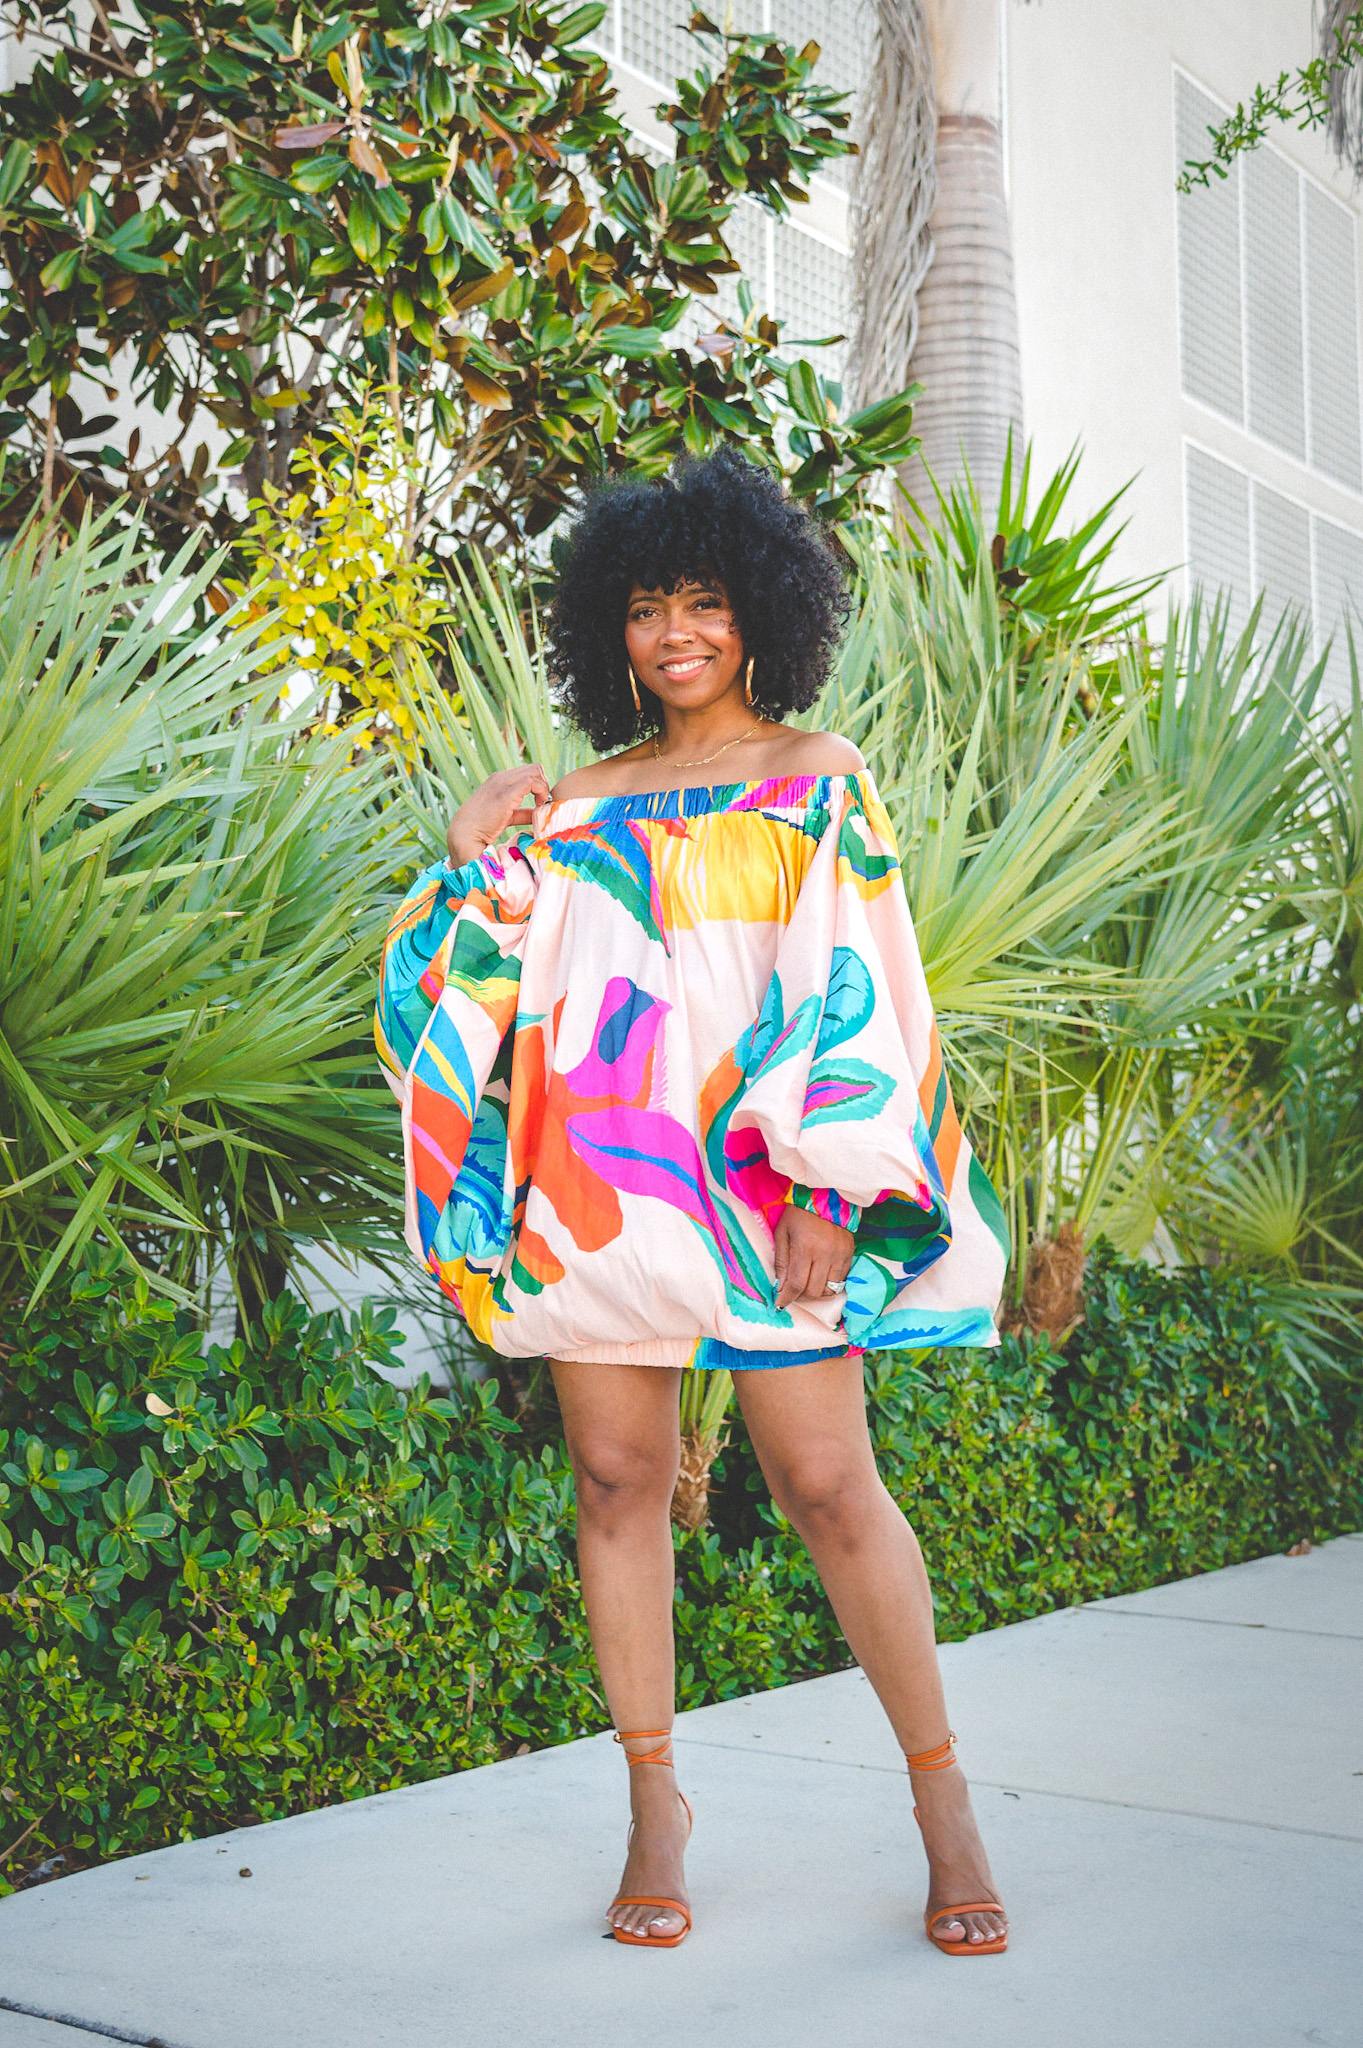 SWEENEE STYLE, SPRING LOOKBOOK, INDIANAPOLIS FASHION INFLUENCER, STYLE BLOGGER, FASHION BLOG, HOW TO DRESS FOR SPRING, NATURAL HAIR INFLUENCER, BROWN GIRL WHO BLOGS